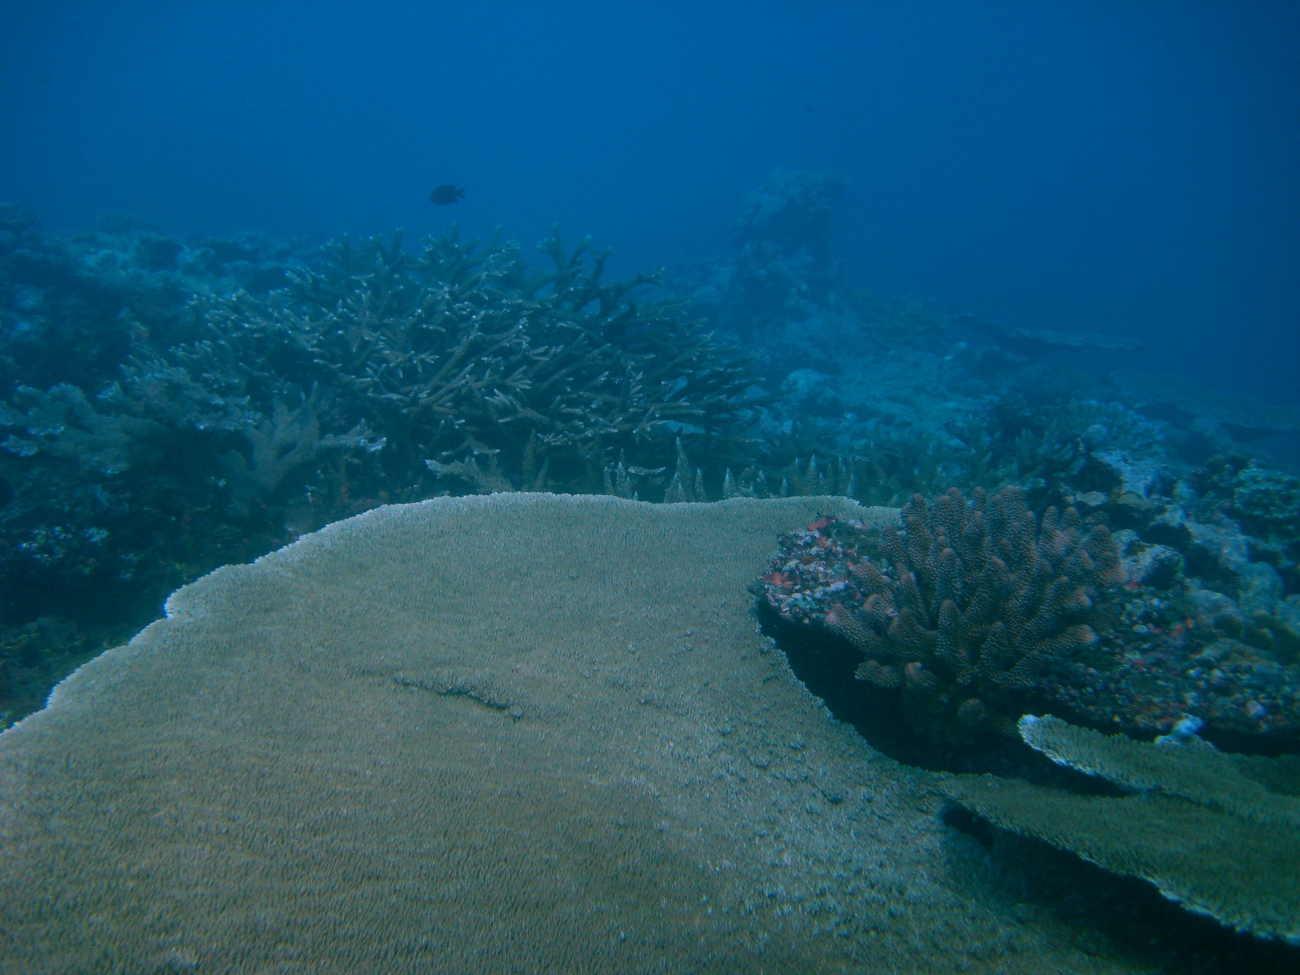 Reef scene - large tabular coral with varieties of staghorn coral